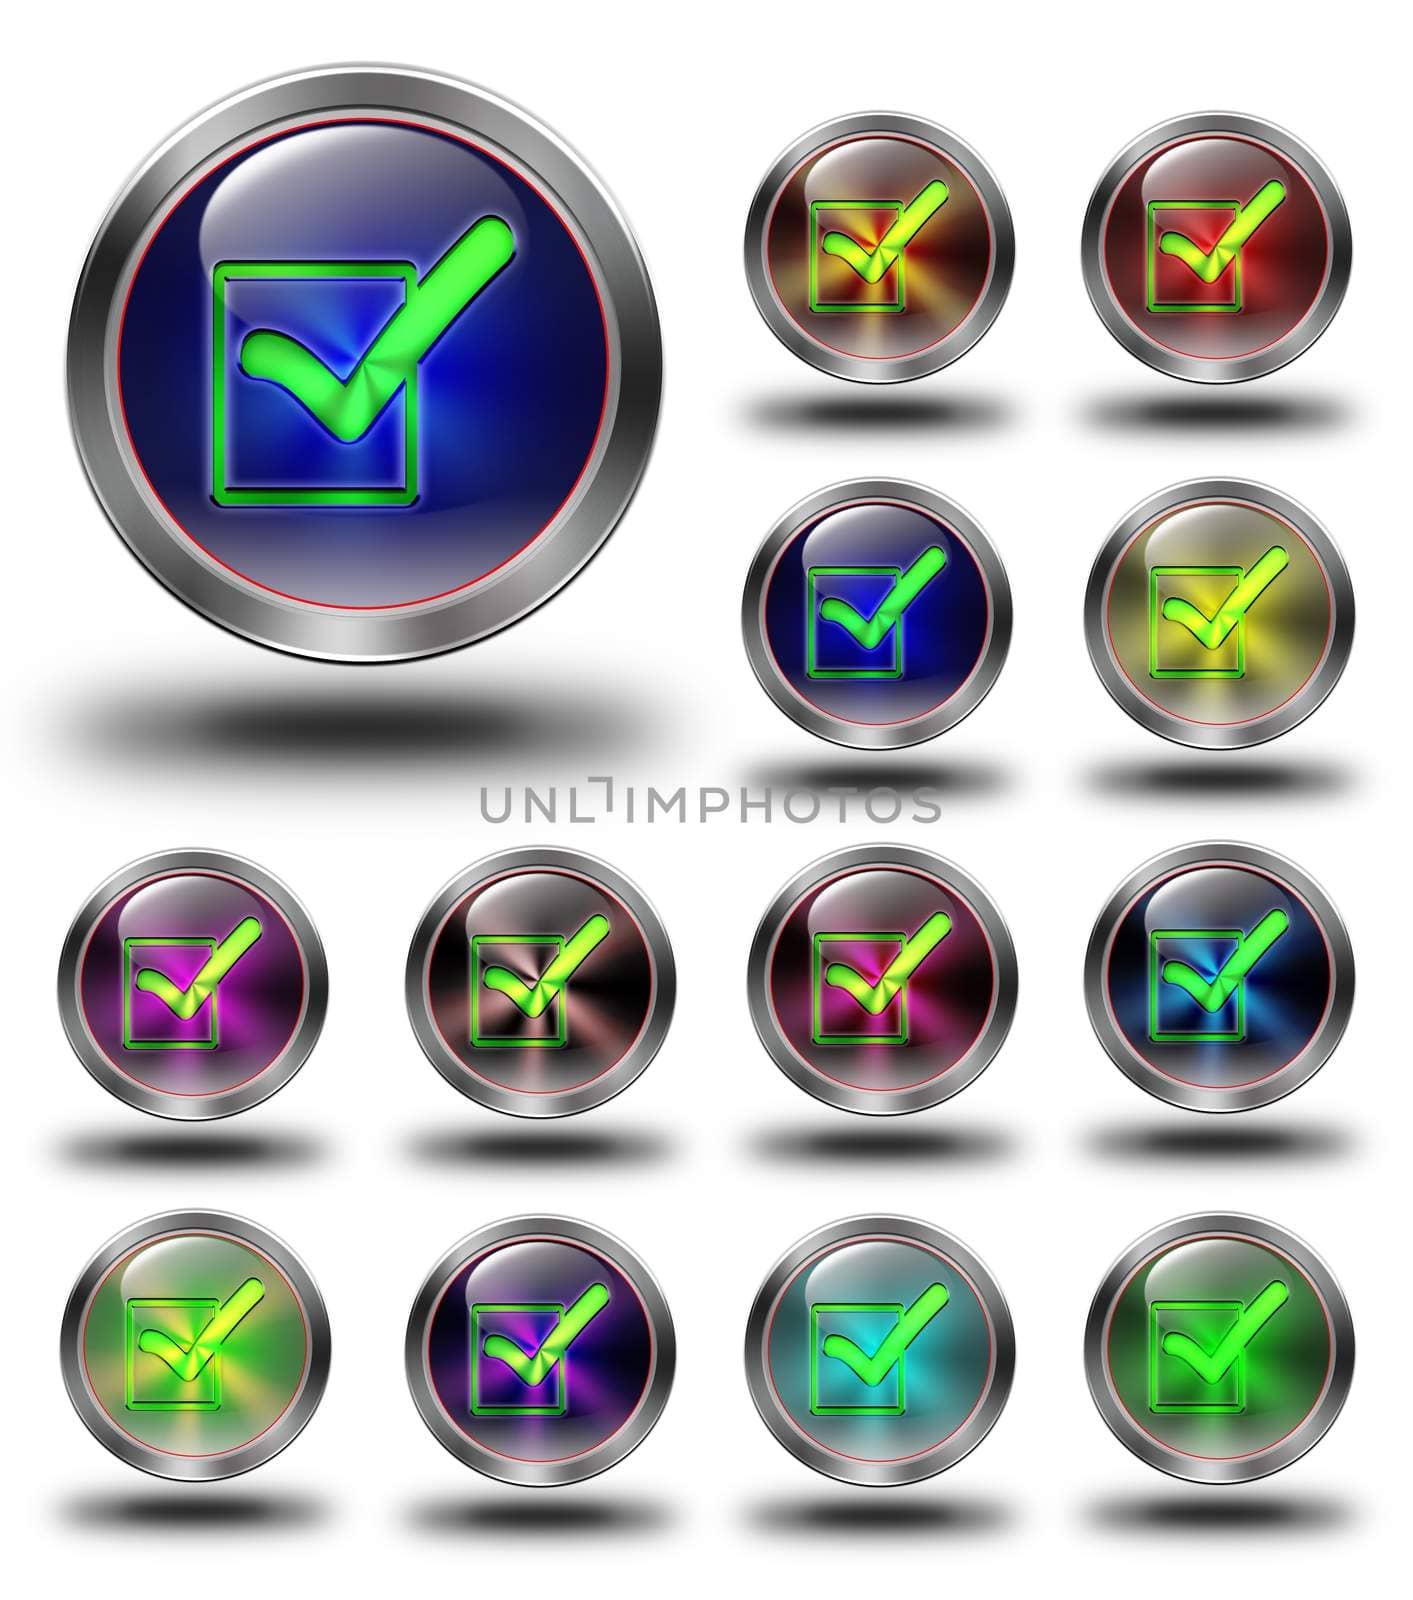 Approved, glossy icon, button, crazy colors, Glossy metallic buttons.